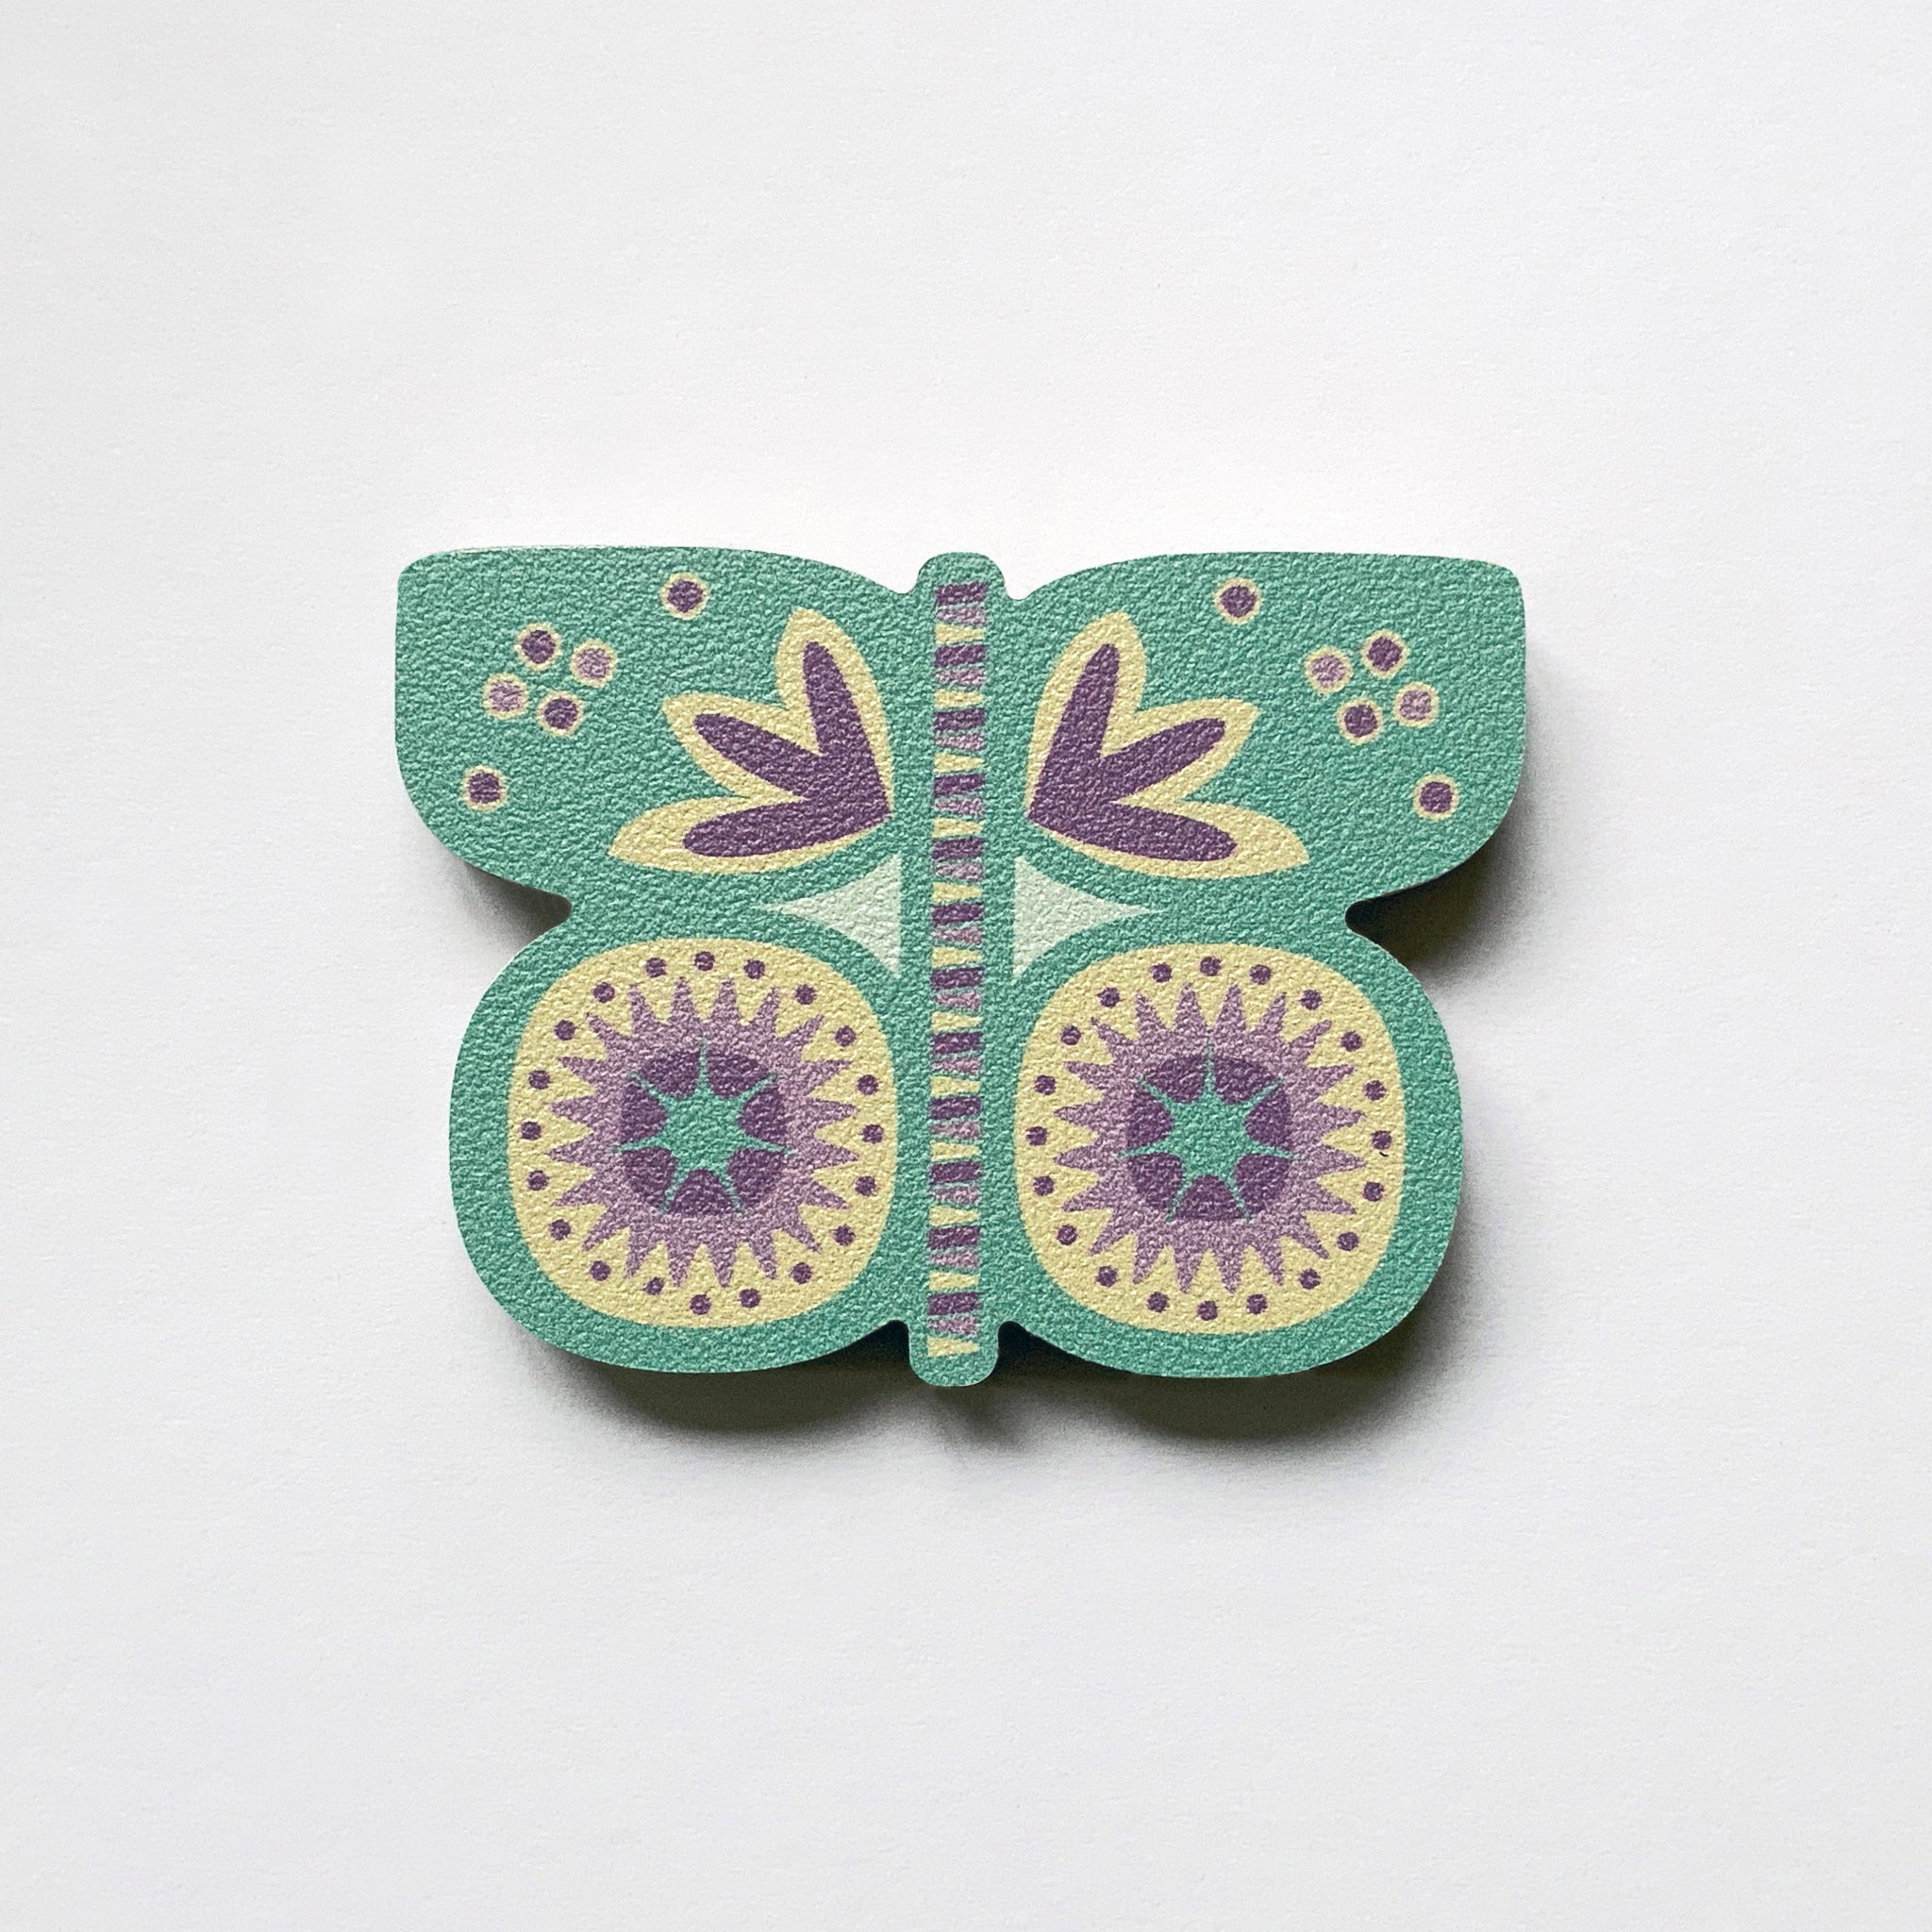 An aqua butterfly shaped plywood fridge magnet by Beyond the Fridge